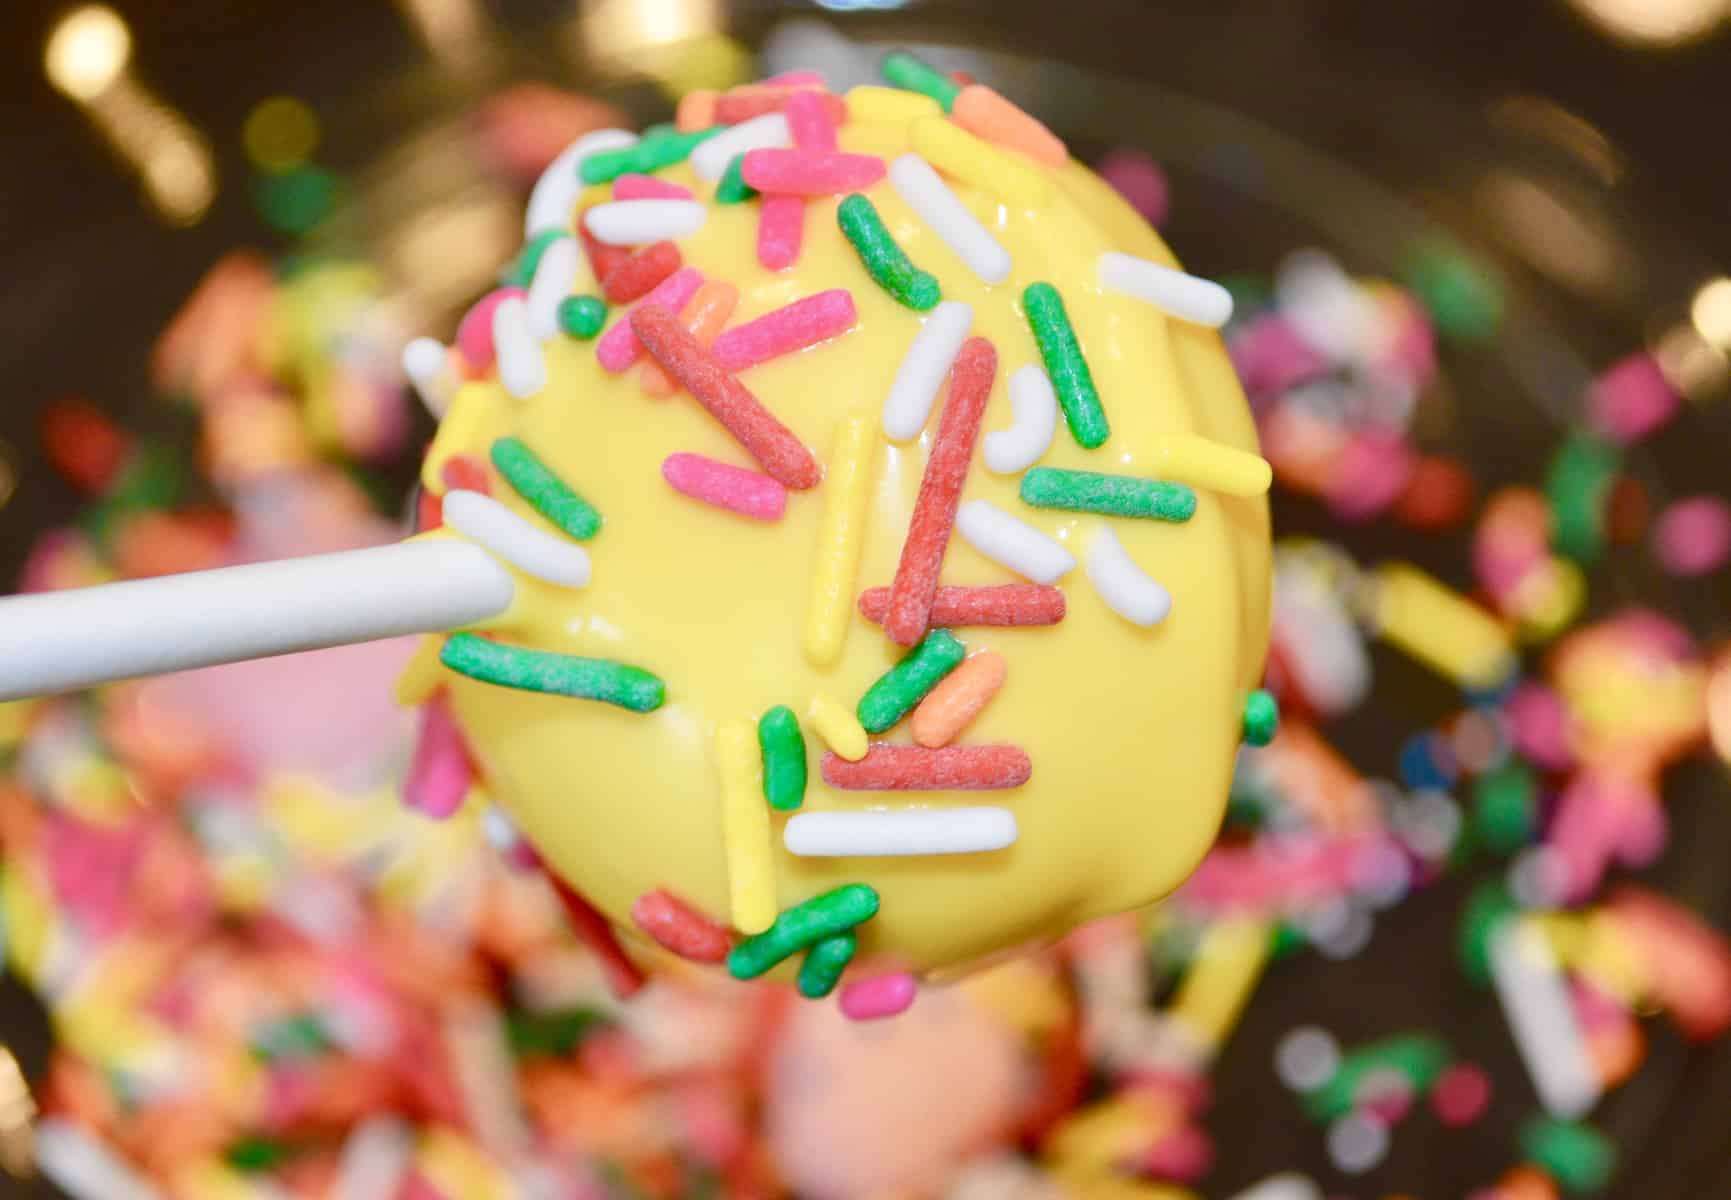 sprinkles covering the yellow cake pop. 